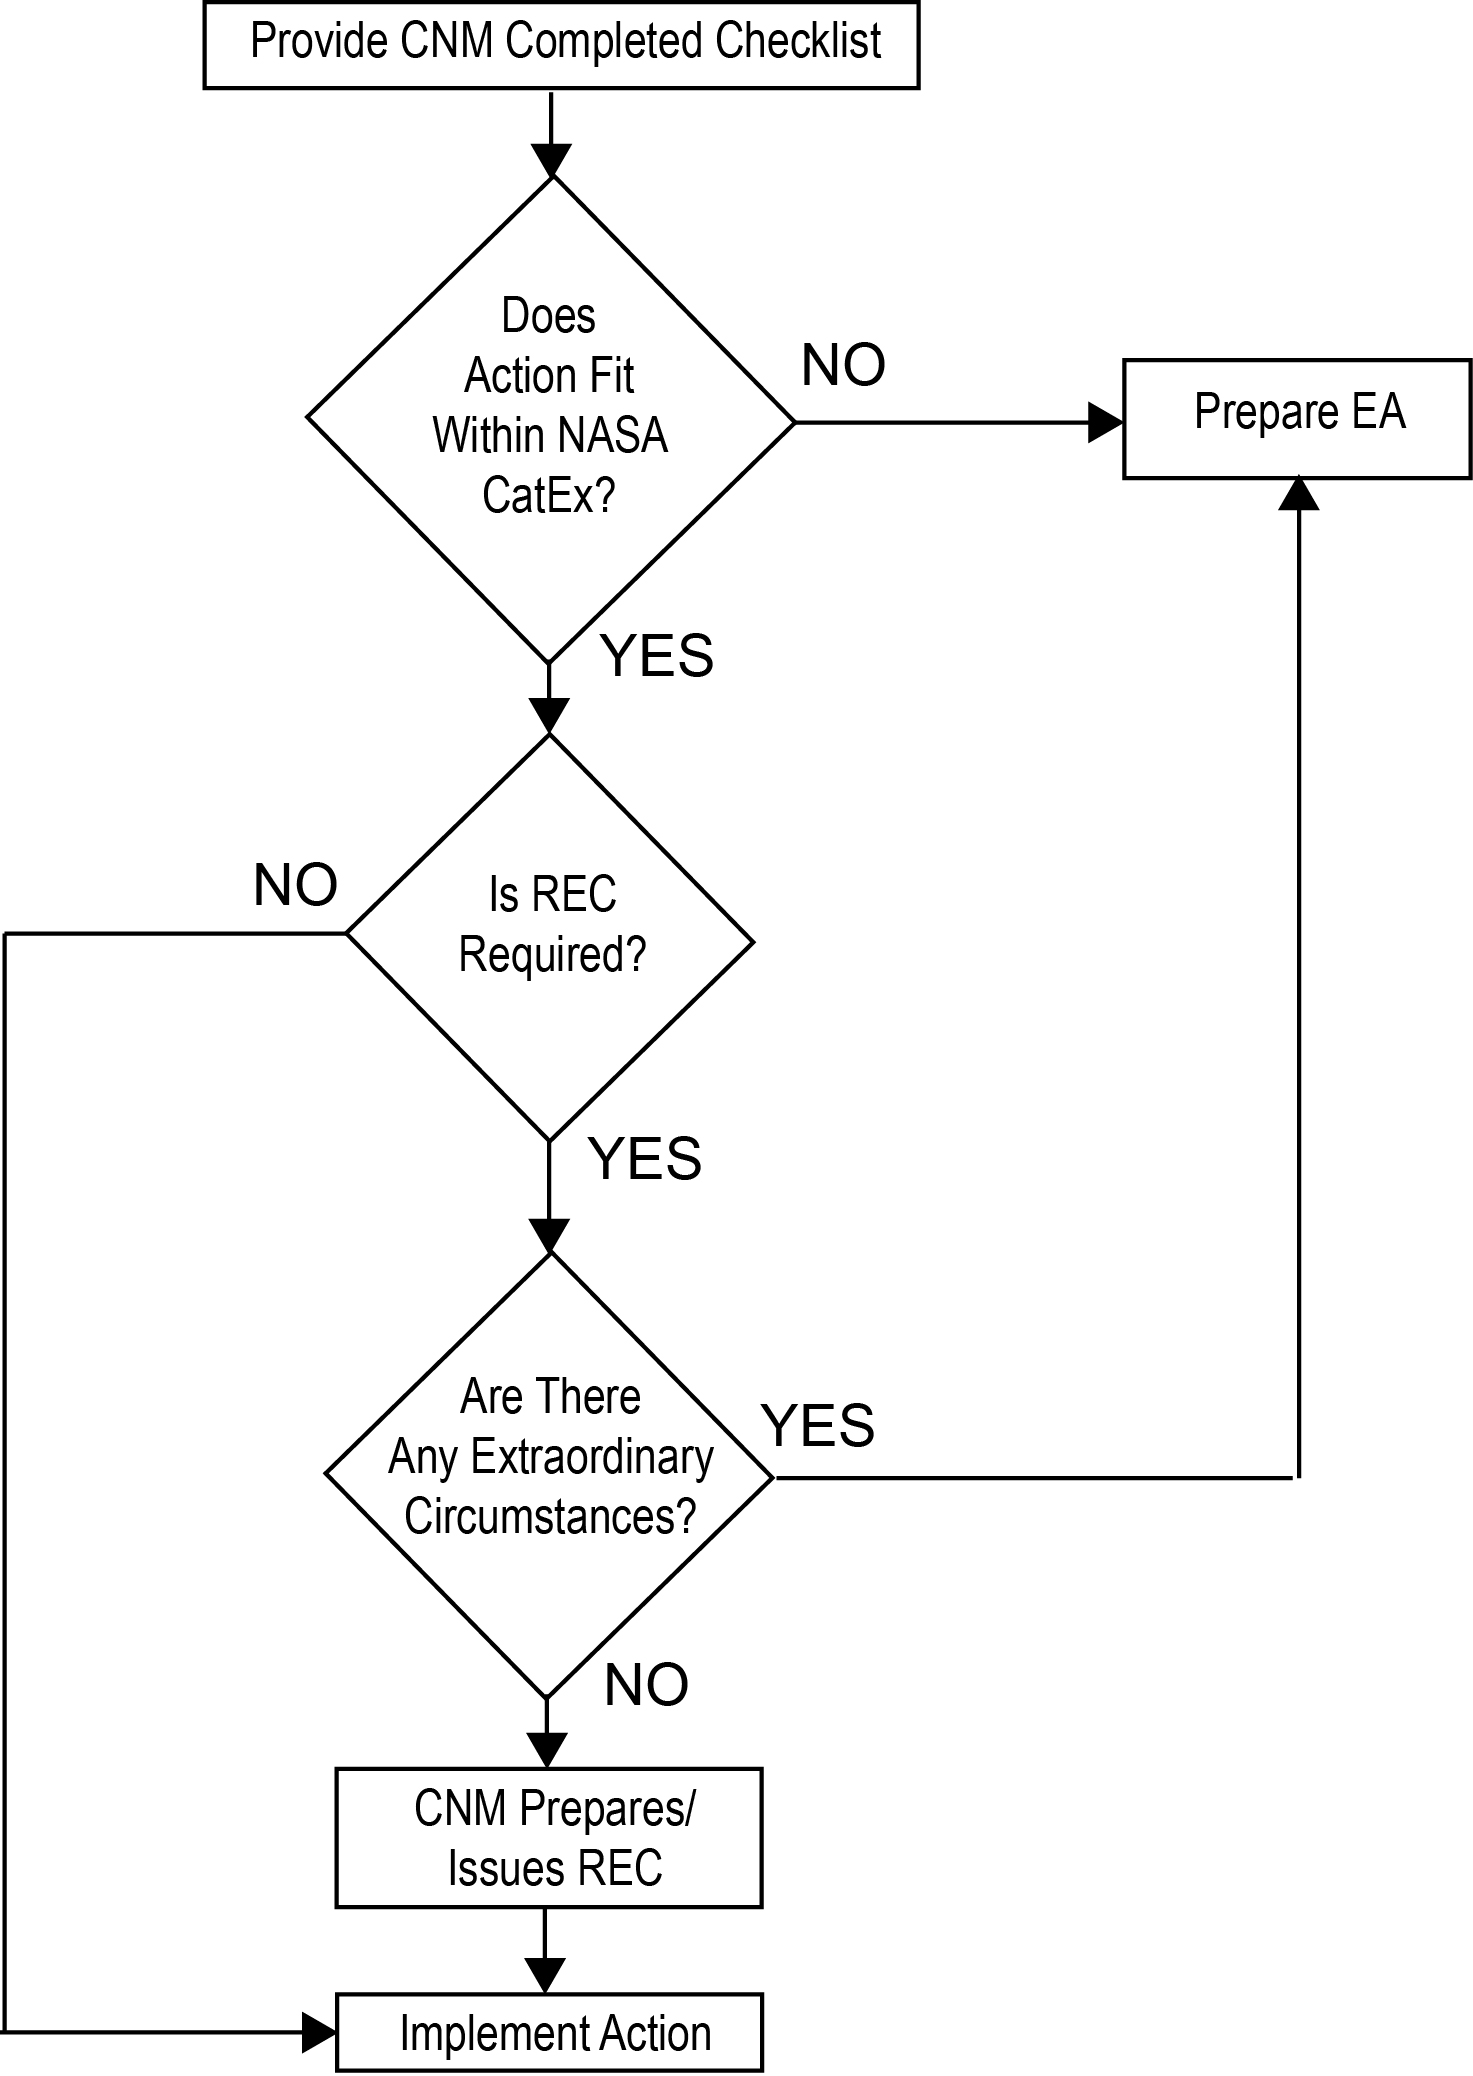 Appendix D flow charts depict the NEPA Process. Figure D-2 show the Summary of the Process for Categorical Exclusion Determination.